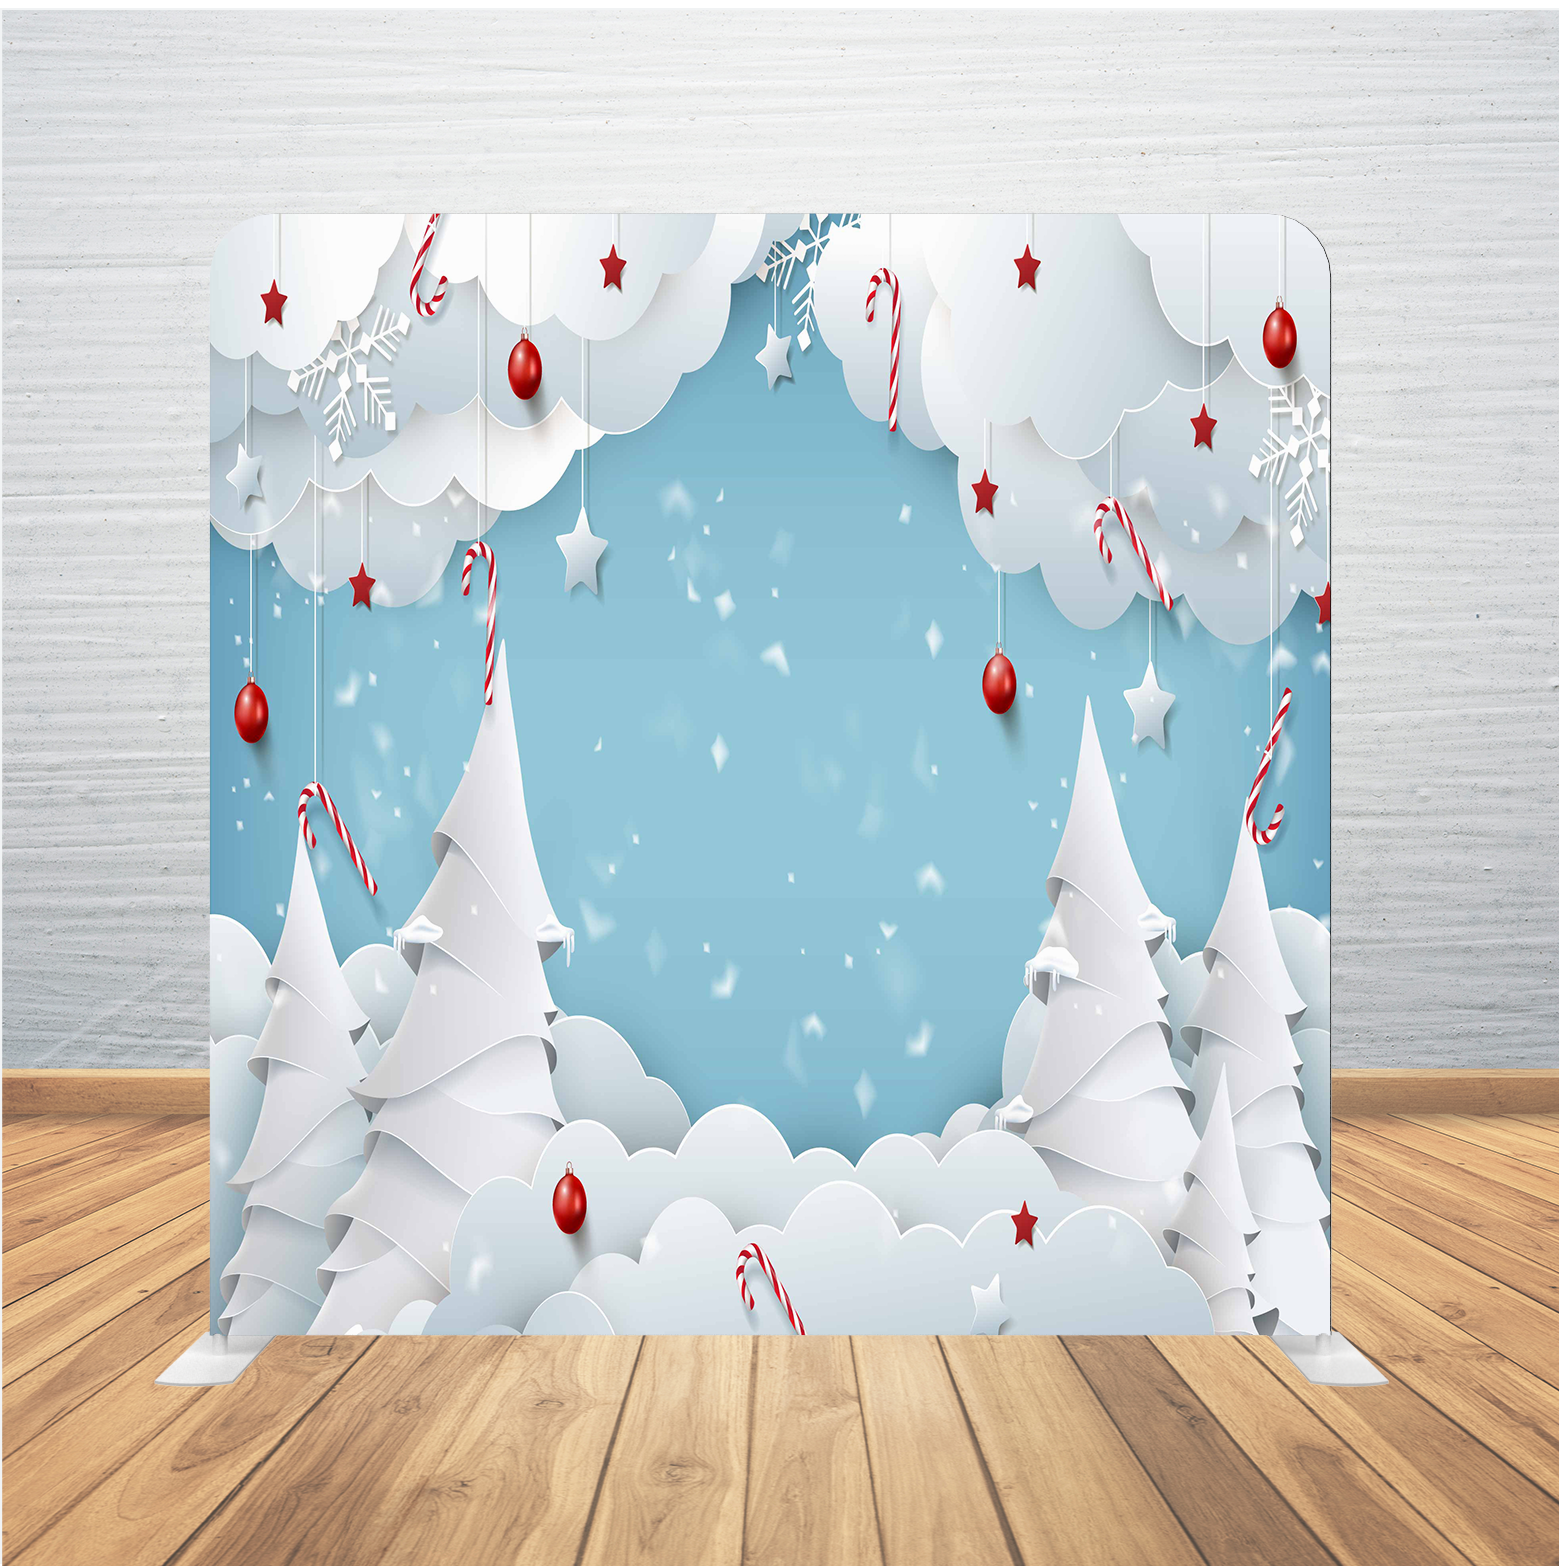 8X8 Pillowcase Tension Backdrop- Snowy Candy Canes